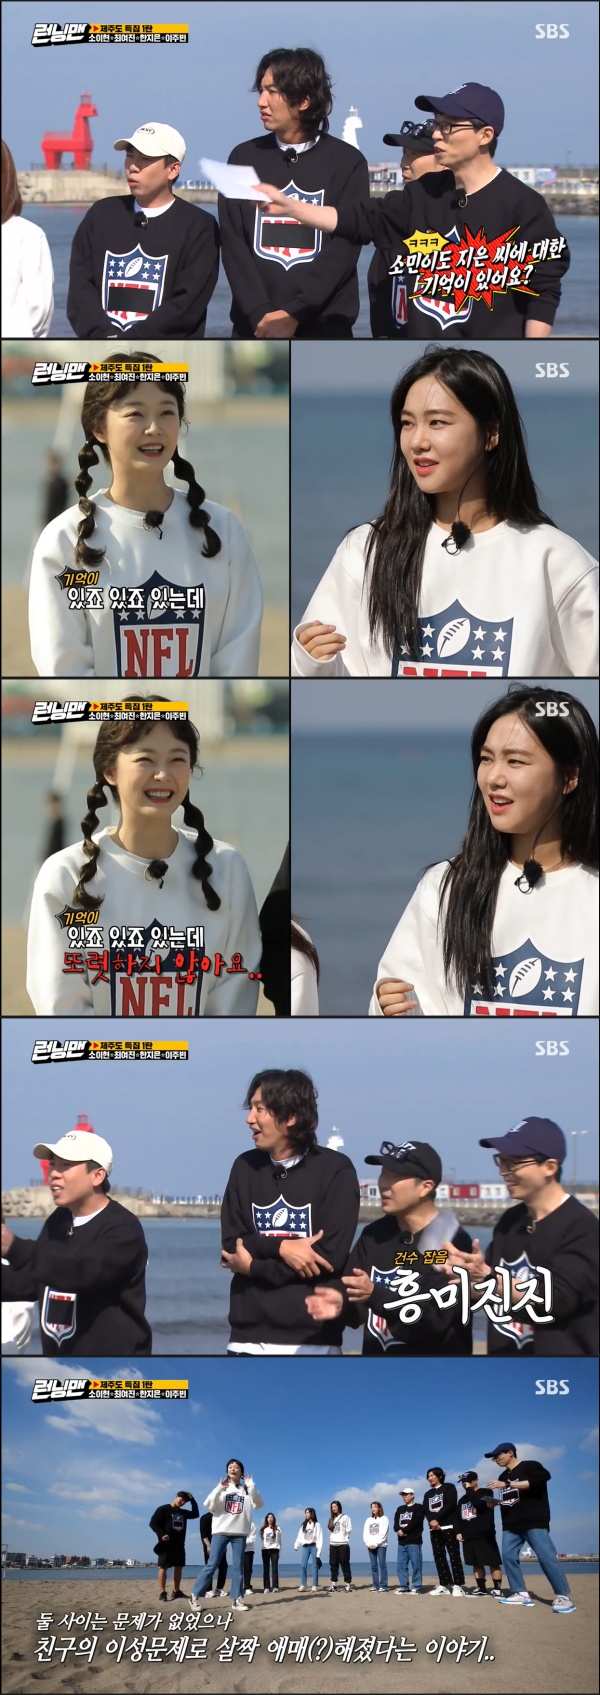 Jeon So-min reveals memories with Han Ji-eunHan Ji-eun Soi Hyun Choi Ji-jin Lee Joo-bin appeared as a guest on SBS Running Man broadcast on the 1st.Yoo Jae-Suk asked Han Ji-eun about the past of Jeon So-min, as Han Ji-eun and Jeon So-min are from the same university.Asked, Han Ji-eun said, I remember (Jeon So-min) being the meeting The Dream Team.Jeon So-min said: There was also a builder on The Dream Team.I once said, When I was in school, I had a hard time meeting and after that, I got another person. Thats Han Ji-eun Haha, who listened to the two peoples stories, told Jeon So-min, You were the position of Yoo Jae-Suk.On the other hand, SBS Running Man is broadcast every Sunday at 5 pm.